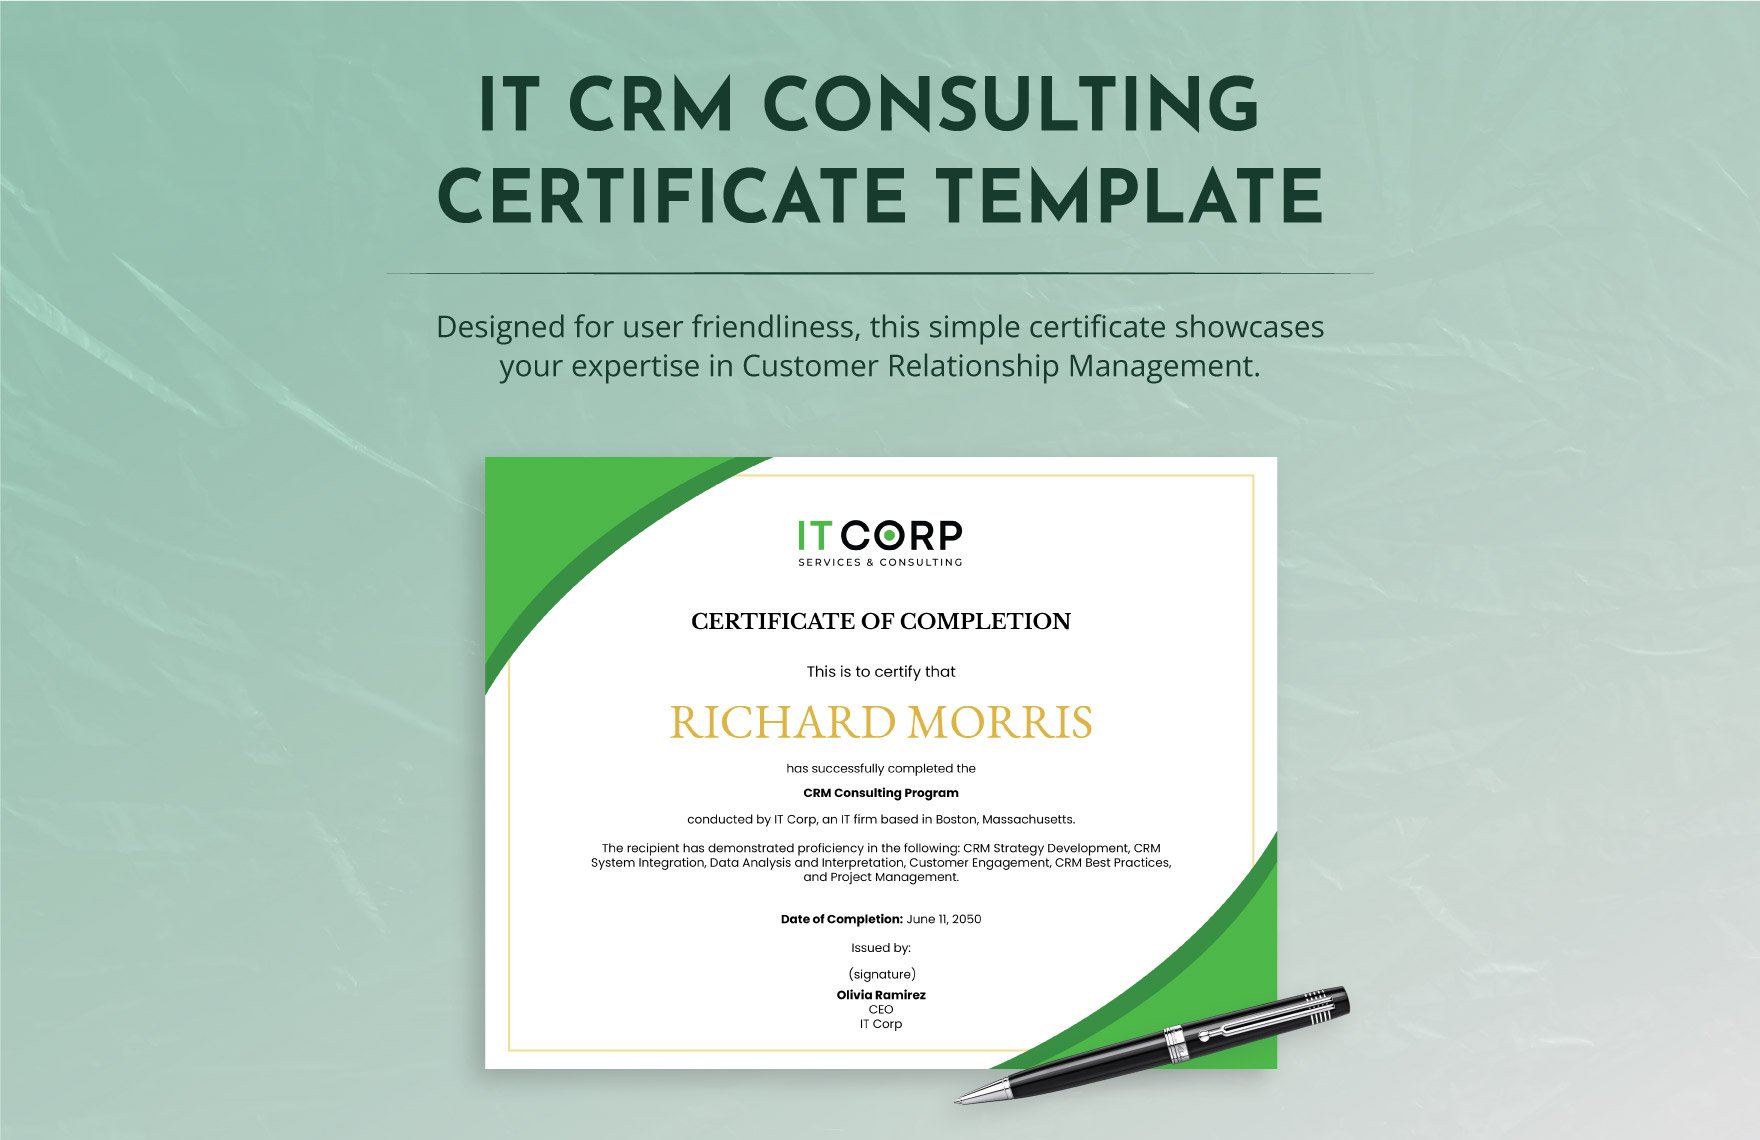 IT CRM Consulting Certificate Template